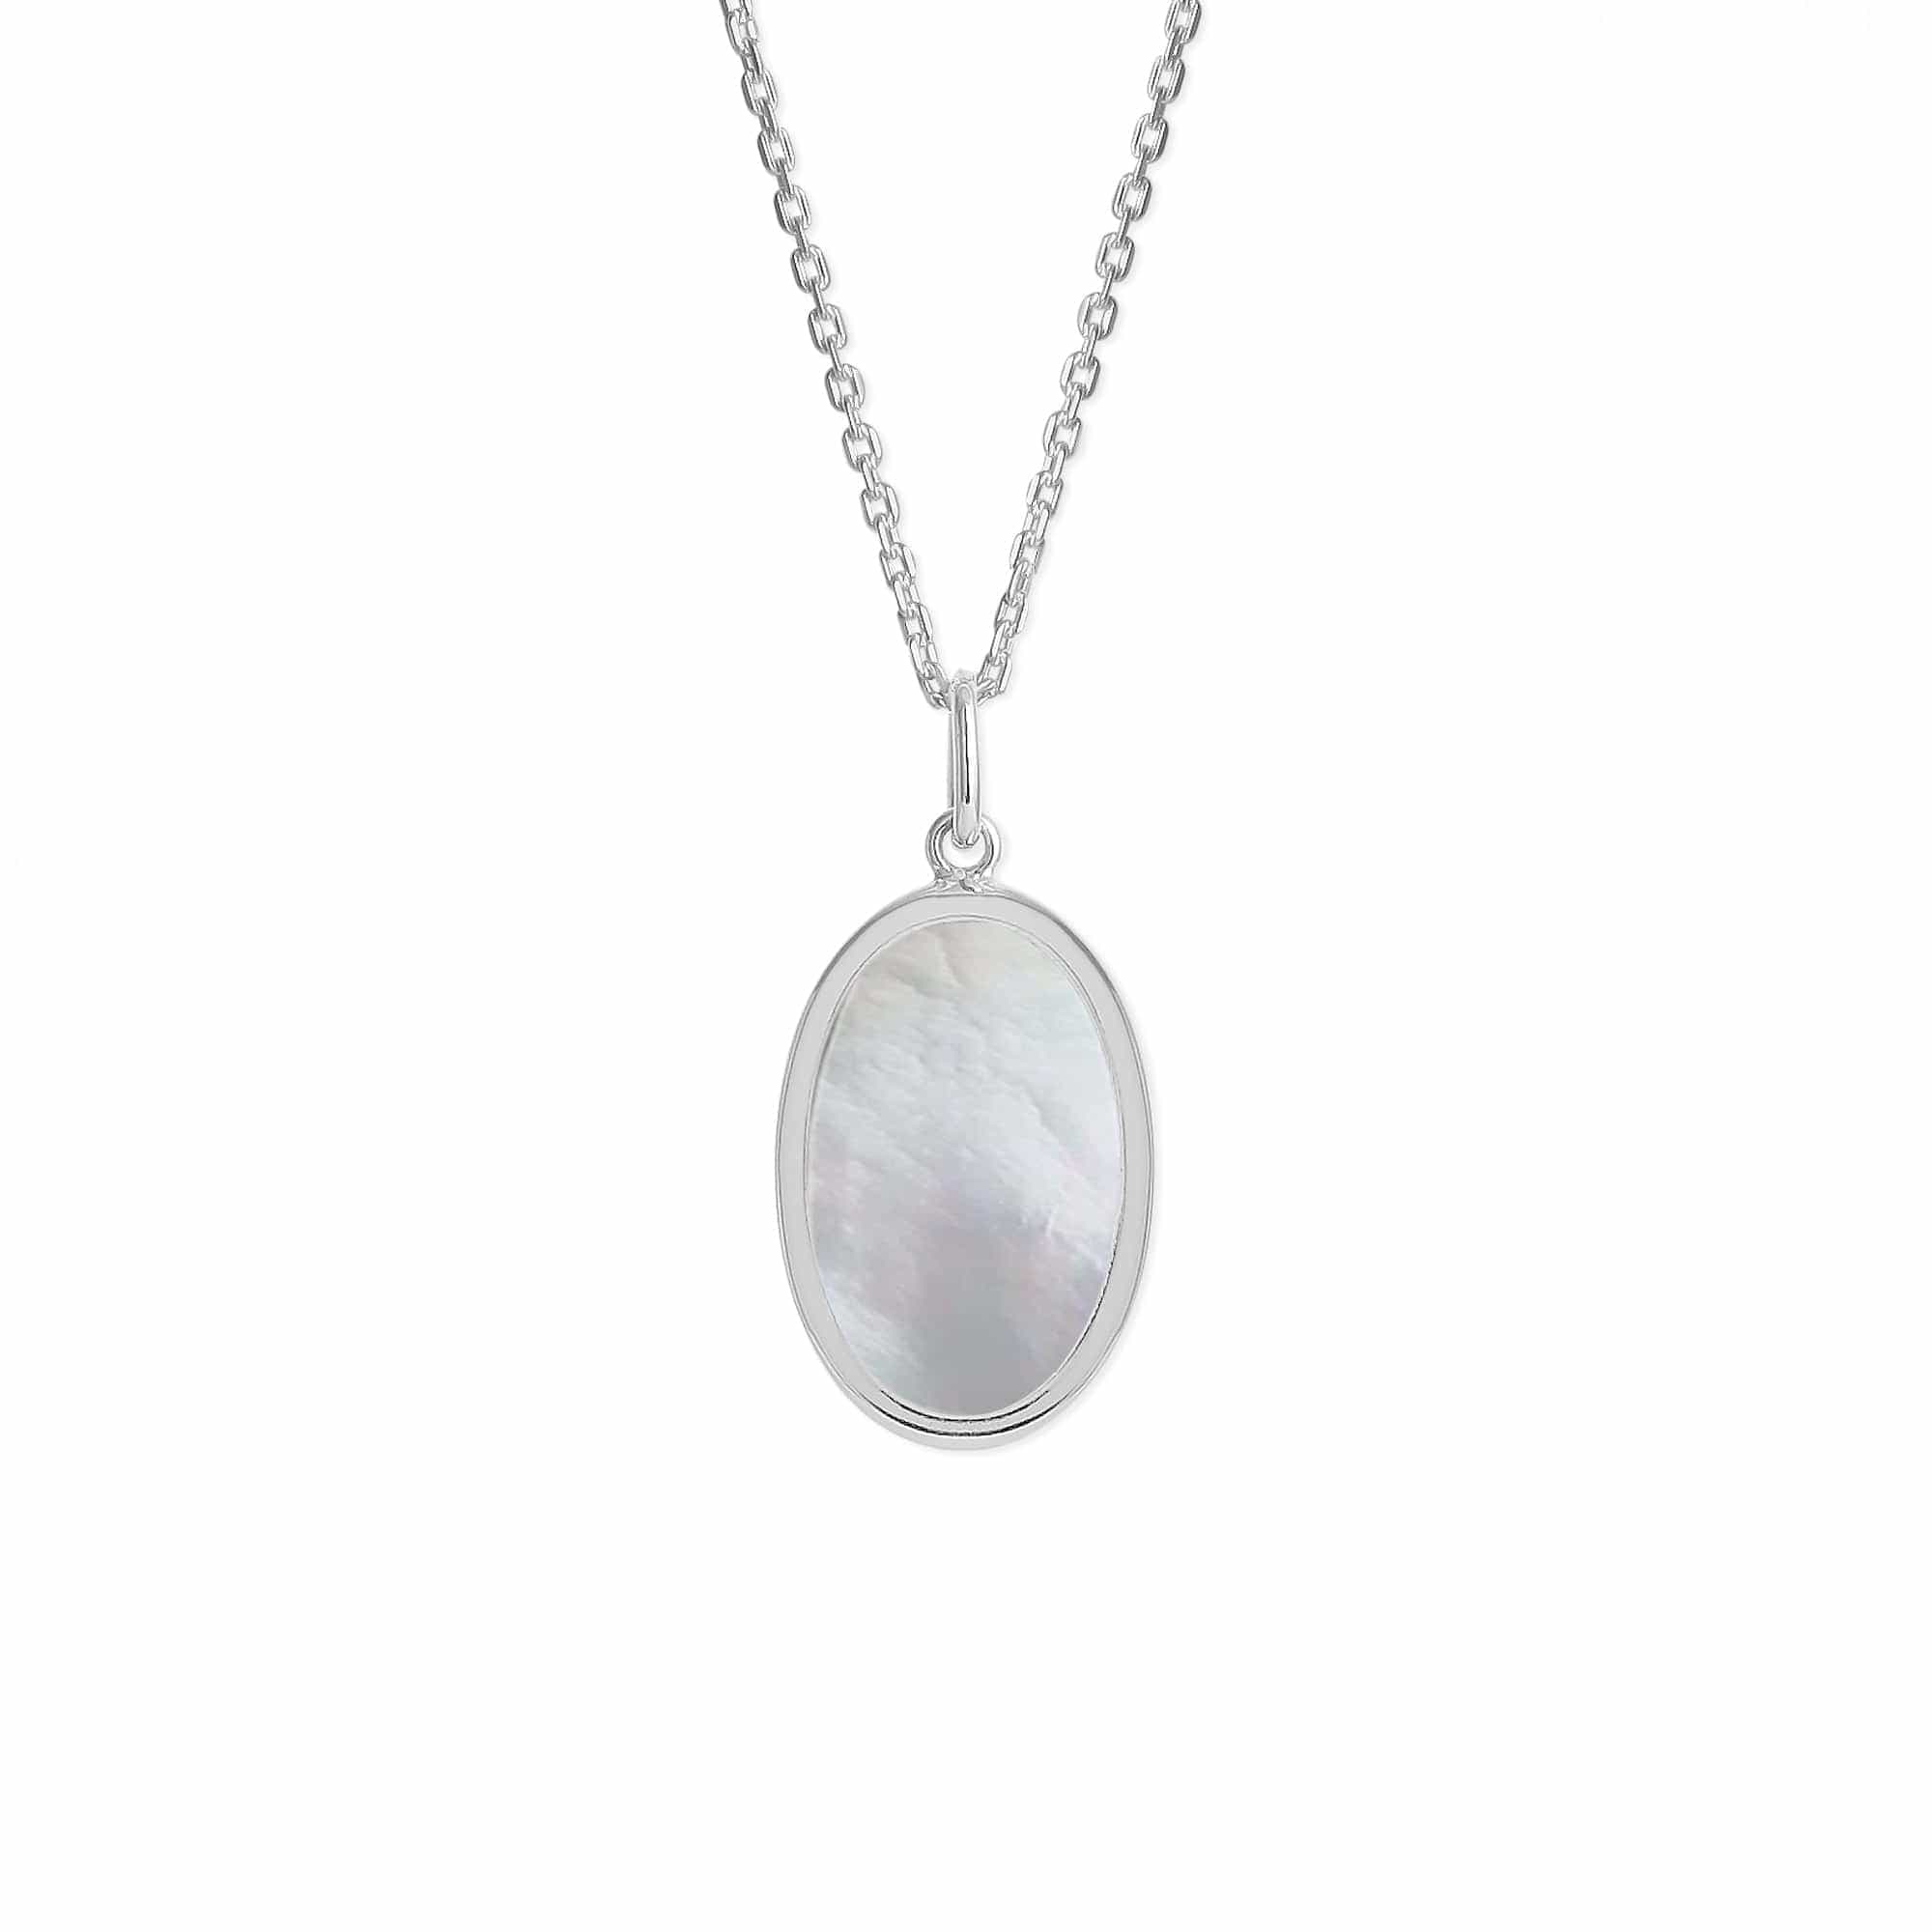 Boma Jewelry Necklaces Mother of Pearl Alina Oval Bezel Pendant Necklace with Stone